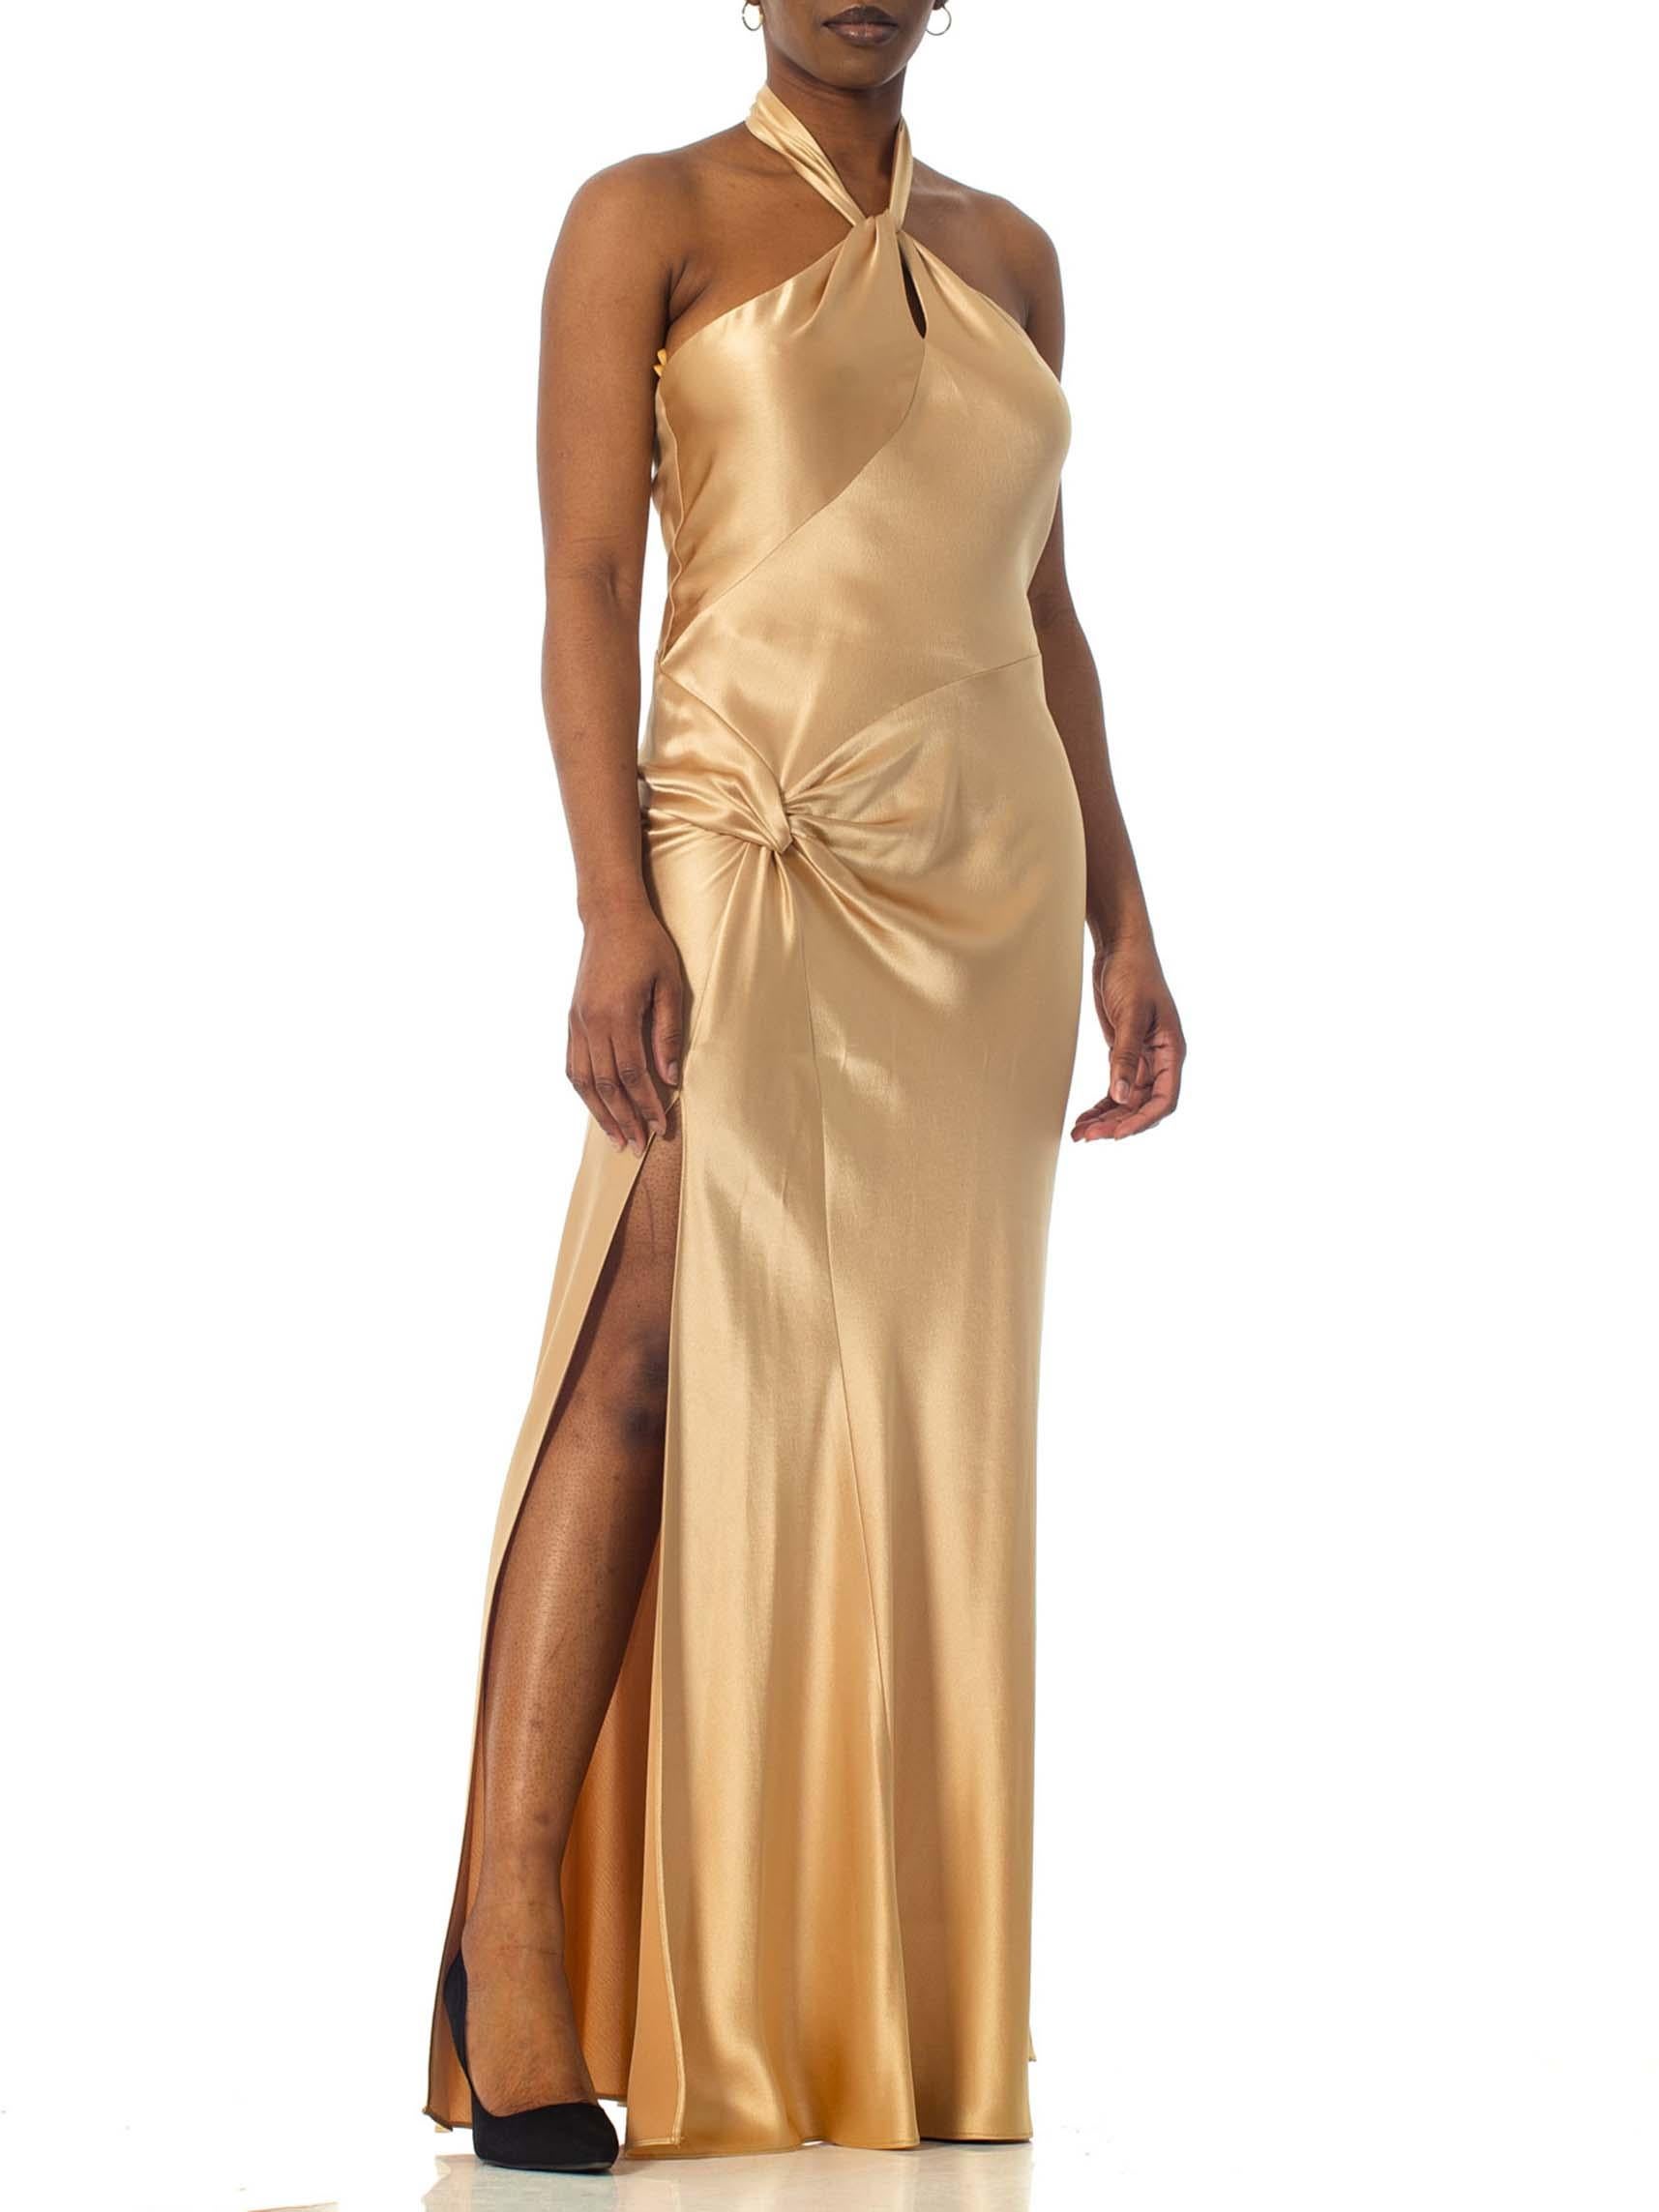 Women's 1990S Champagne Bias Cut Rayon Crepe Back Satin Halter Neck Gown With High Slit